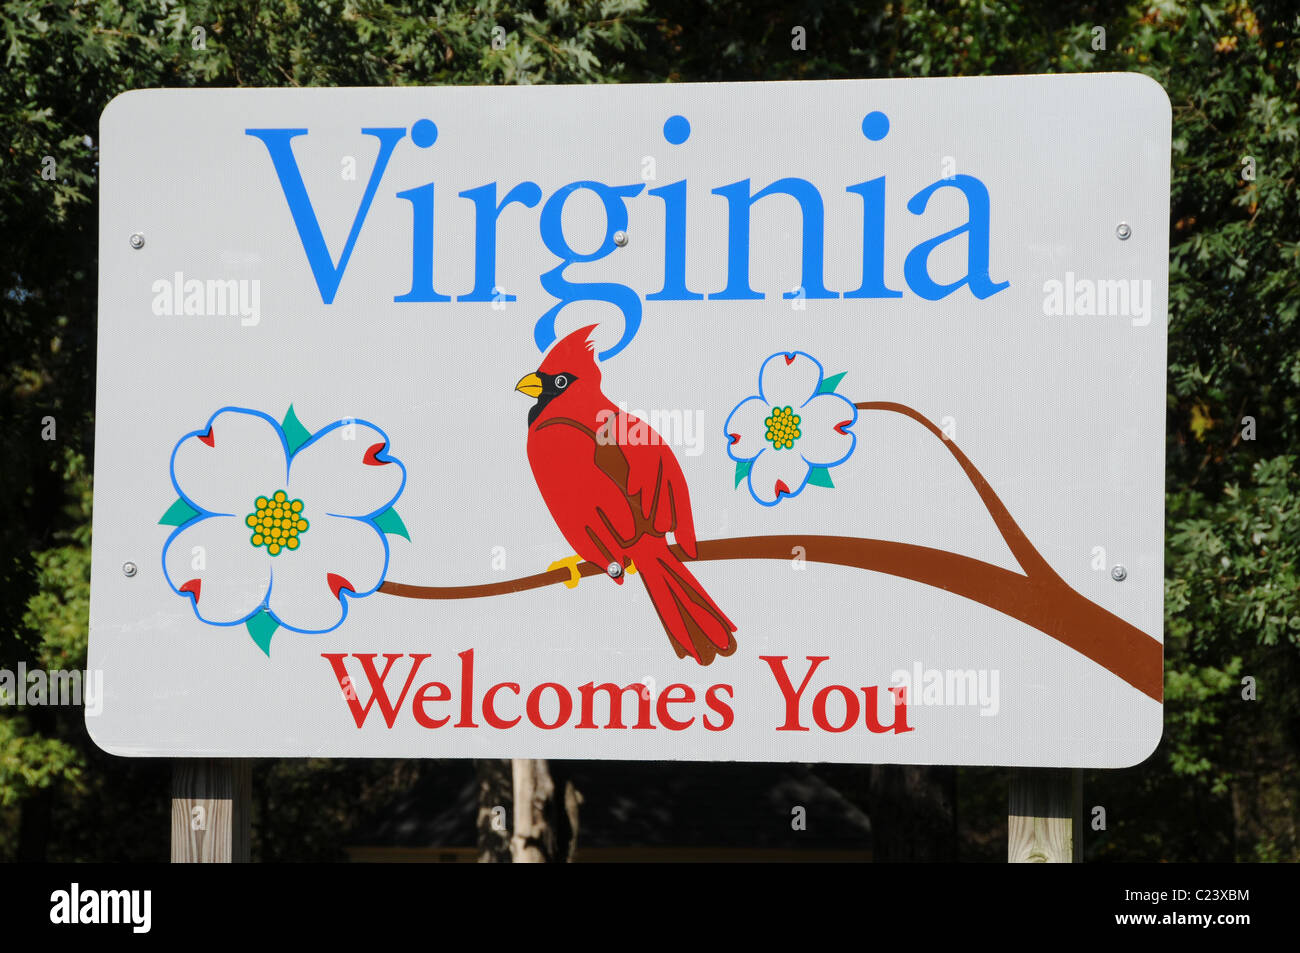 Virgina Welcomes You Sign at the Fairfax Virginia Interstate 66 Rest Area Stock Photo